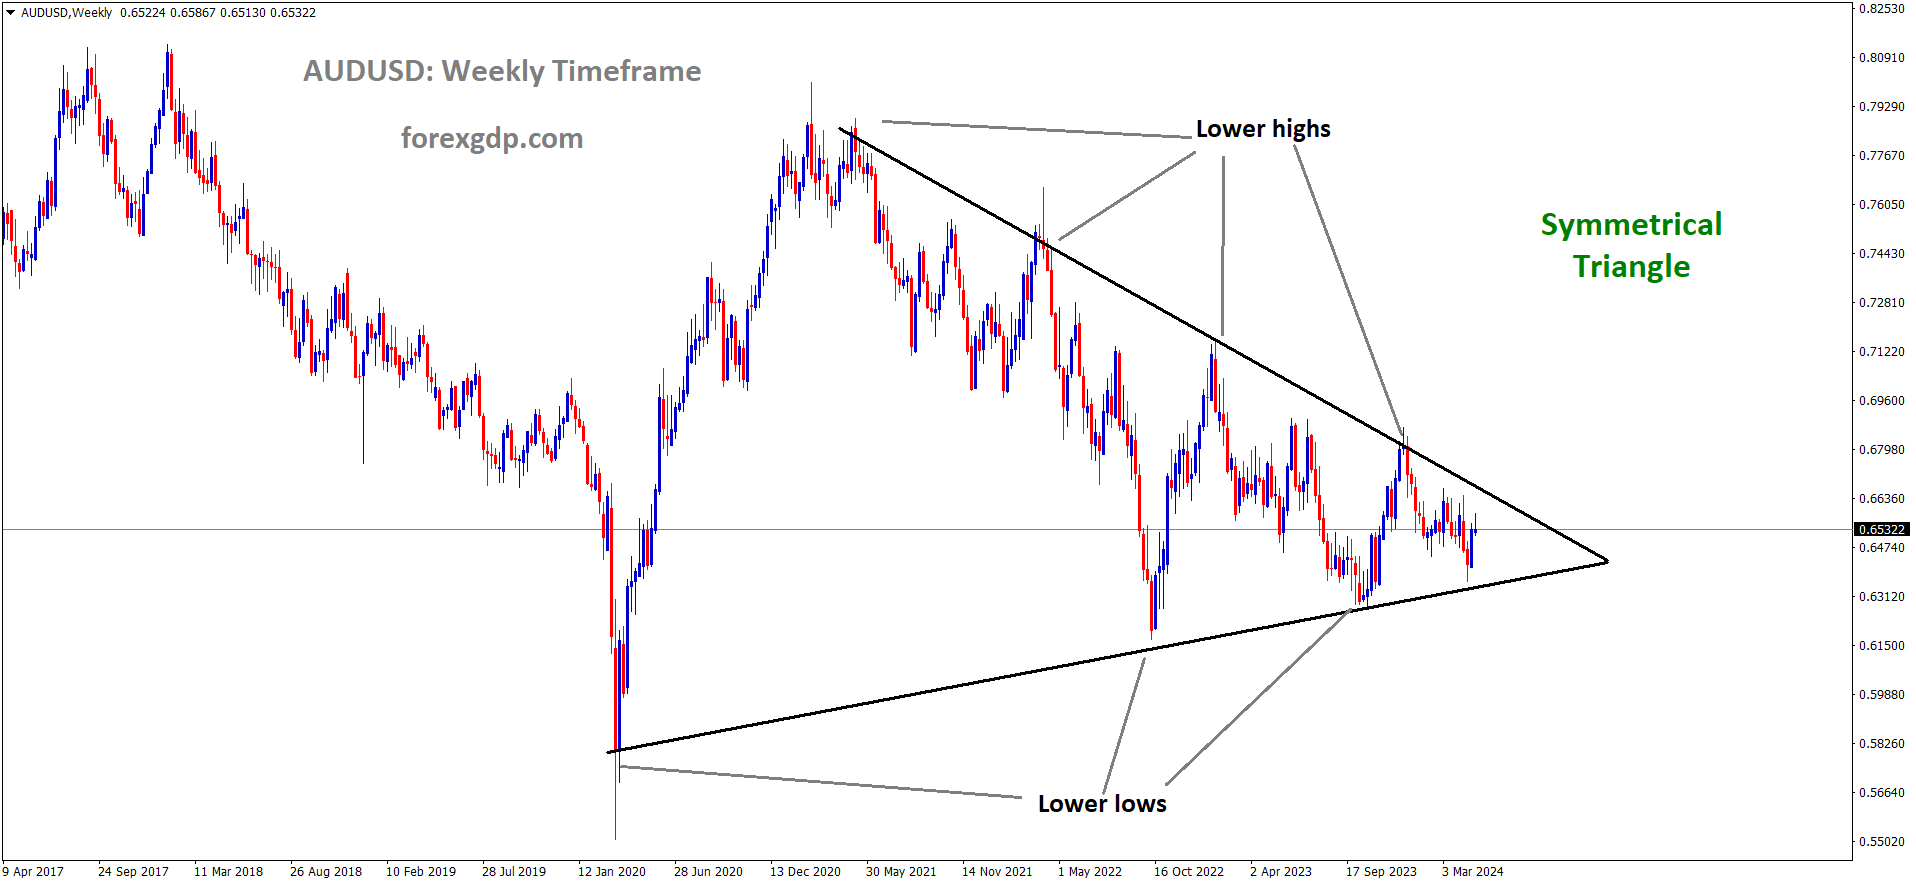 AUDUSD is moving in Symmetrical Triangle